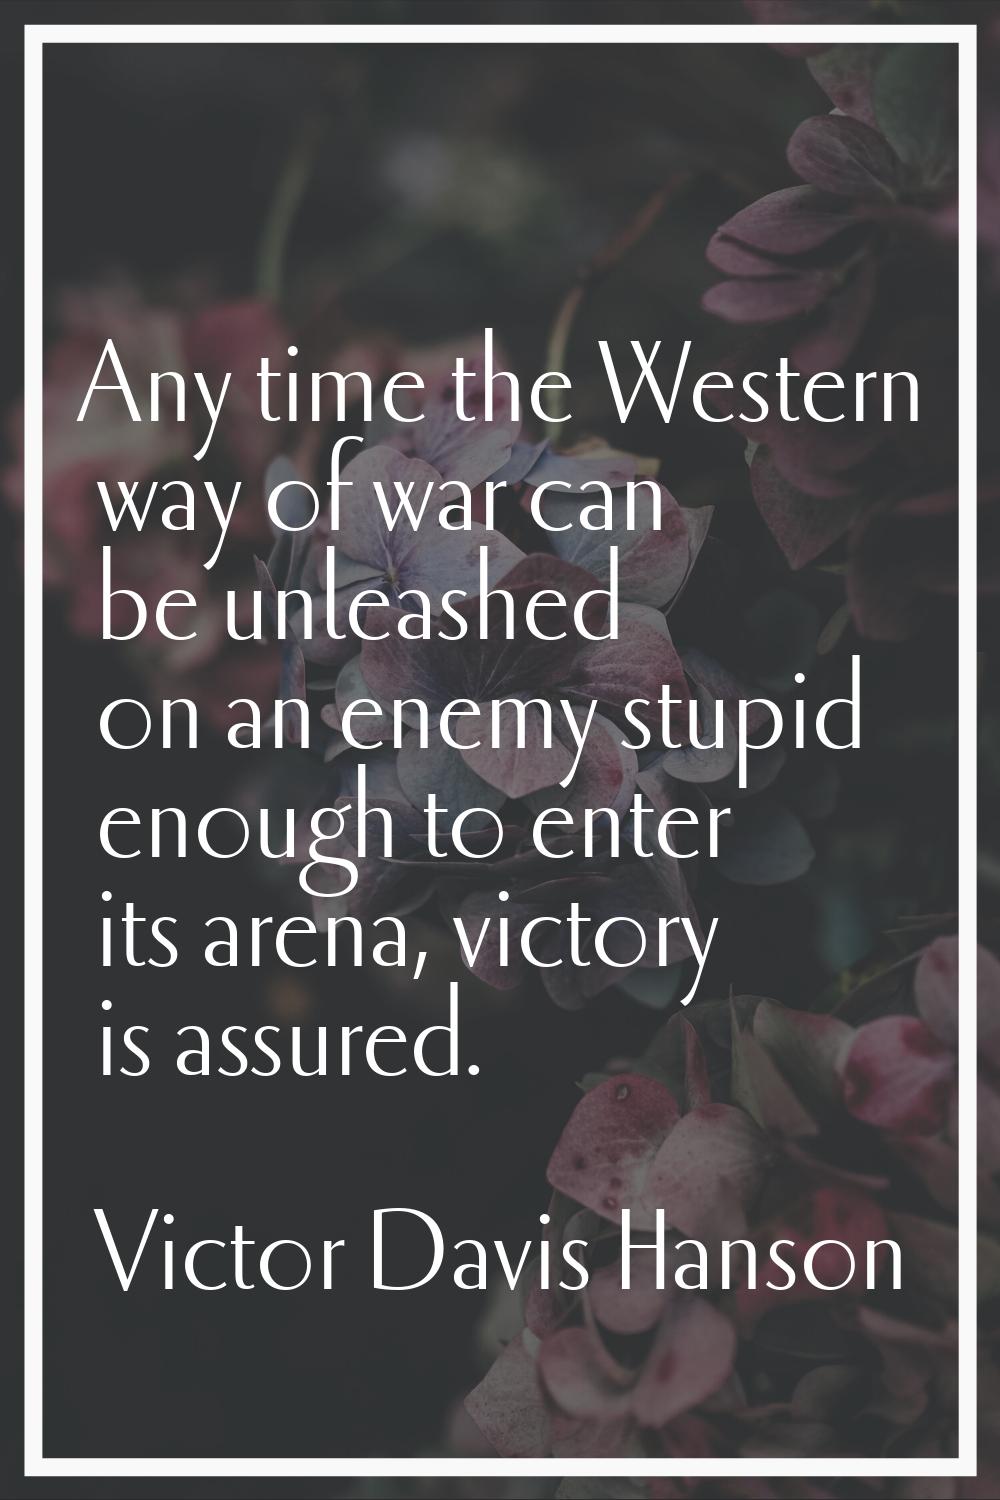 Any time the Western way of war can be unleashed on an enemy stupid enough to enter its arena, vict